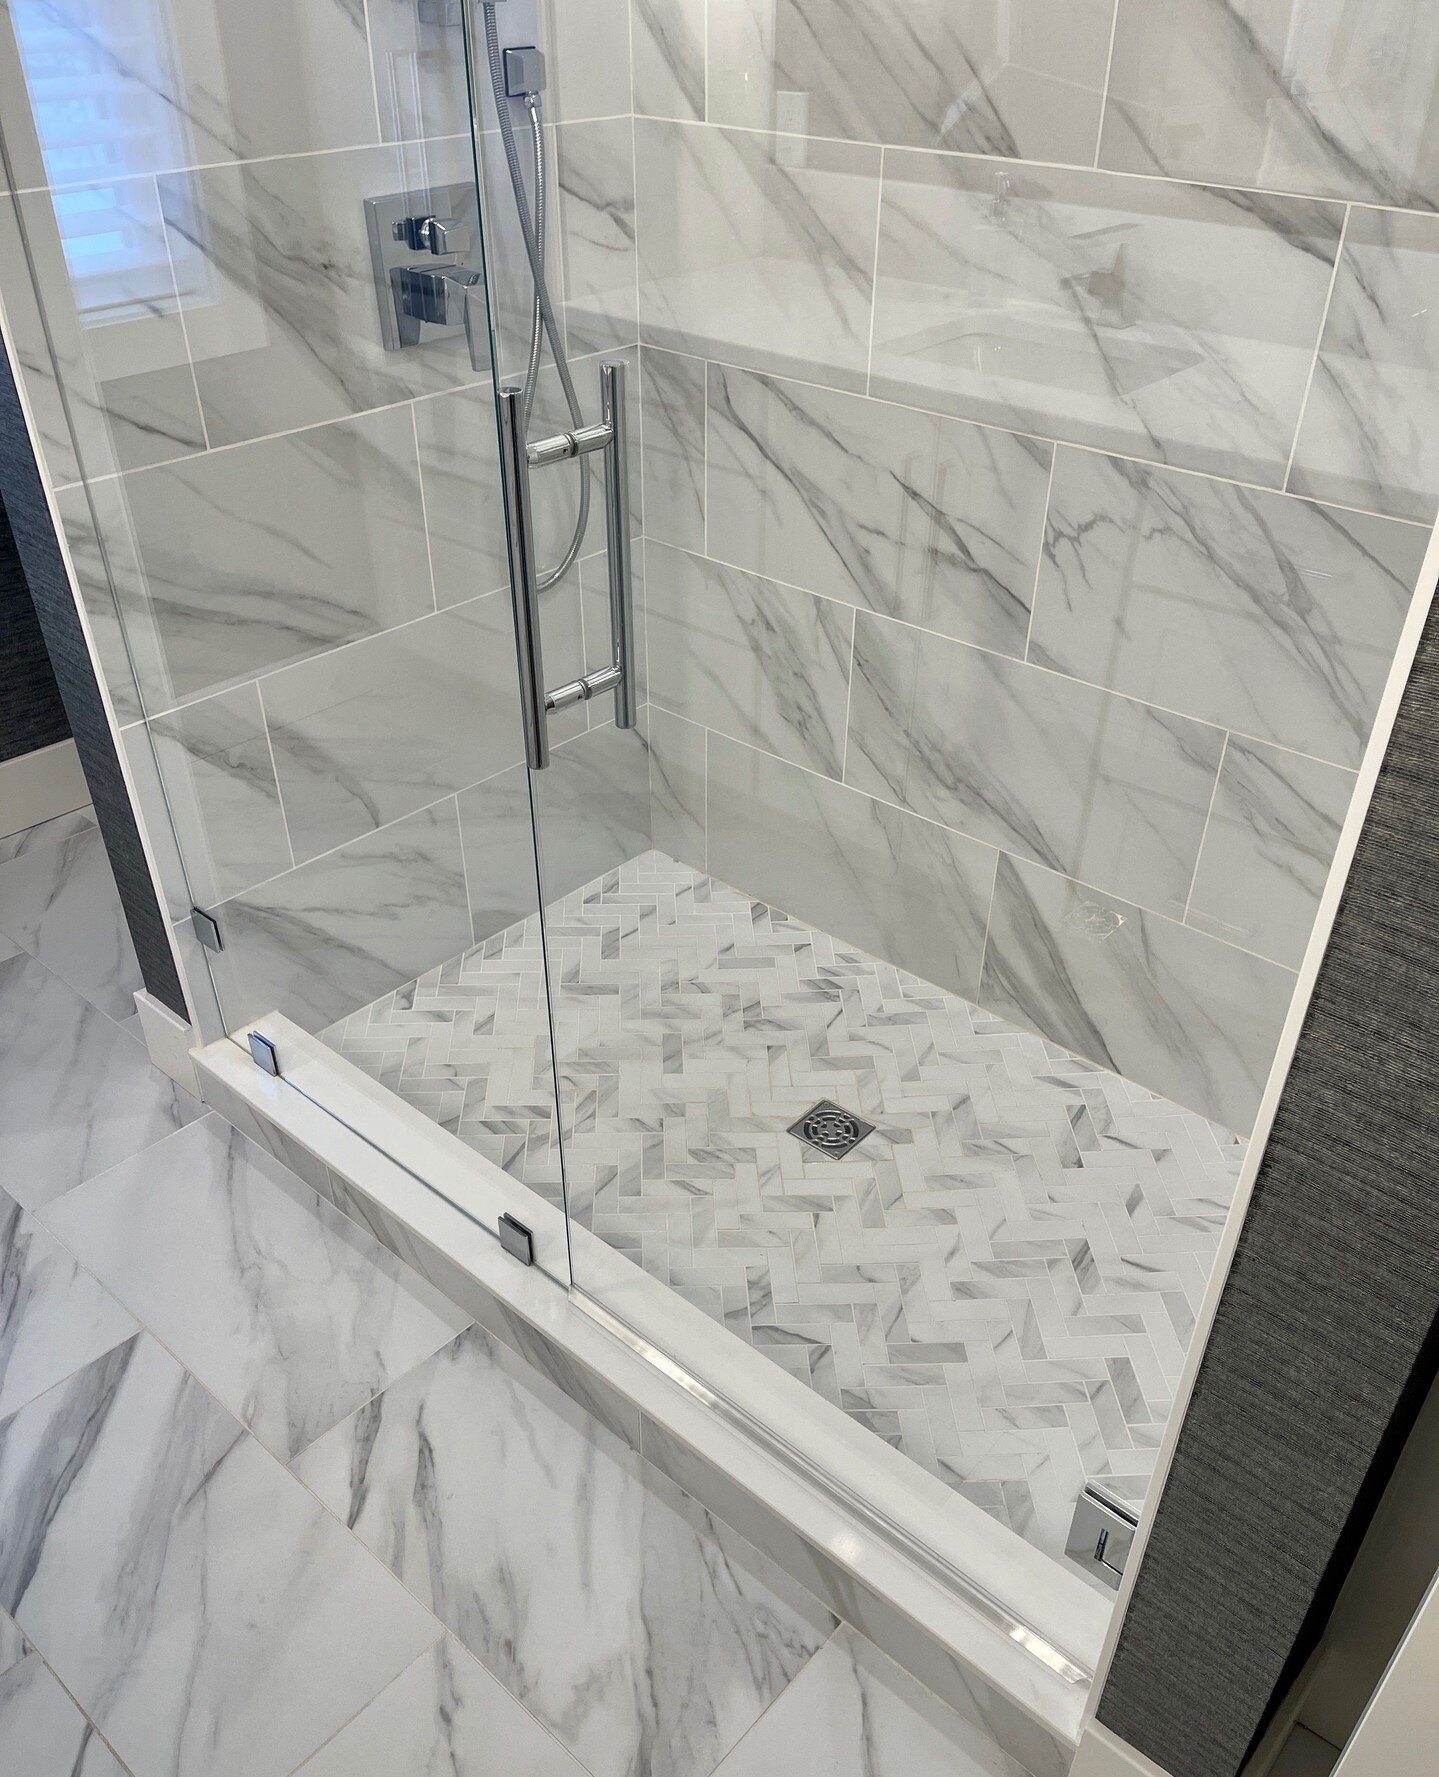 Appreciating the sophistication of porcelain tile with a resemblance to genuine marble 🤍⁠
.⁠
.⁠
.⁠
.⁠
#bathroom #primarybathroom #bathroomrenovation #bathroomreno #mydesign #luxuryhome #interiordesign #home #instadesign #homeinspo #design #interiors